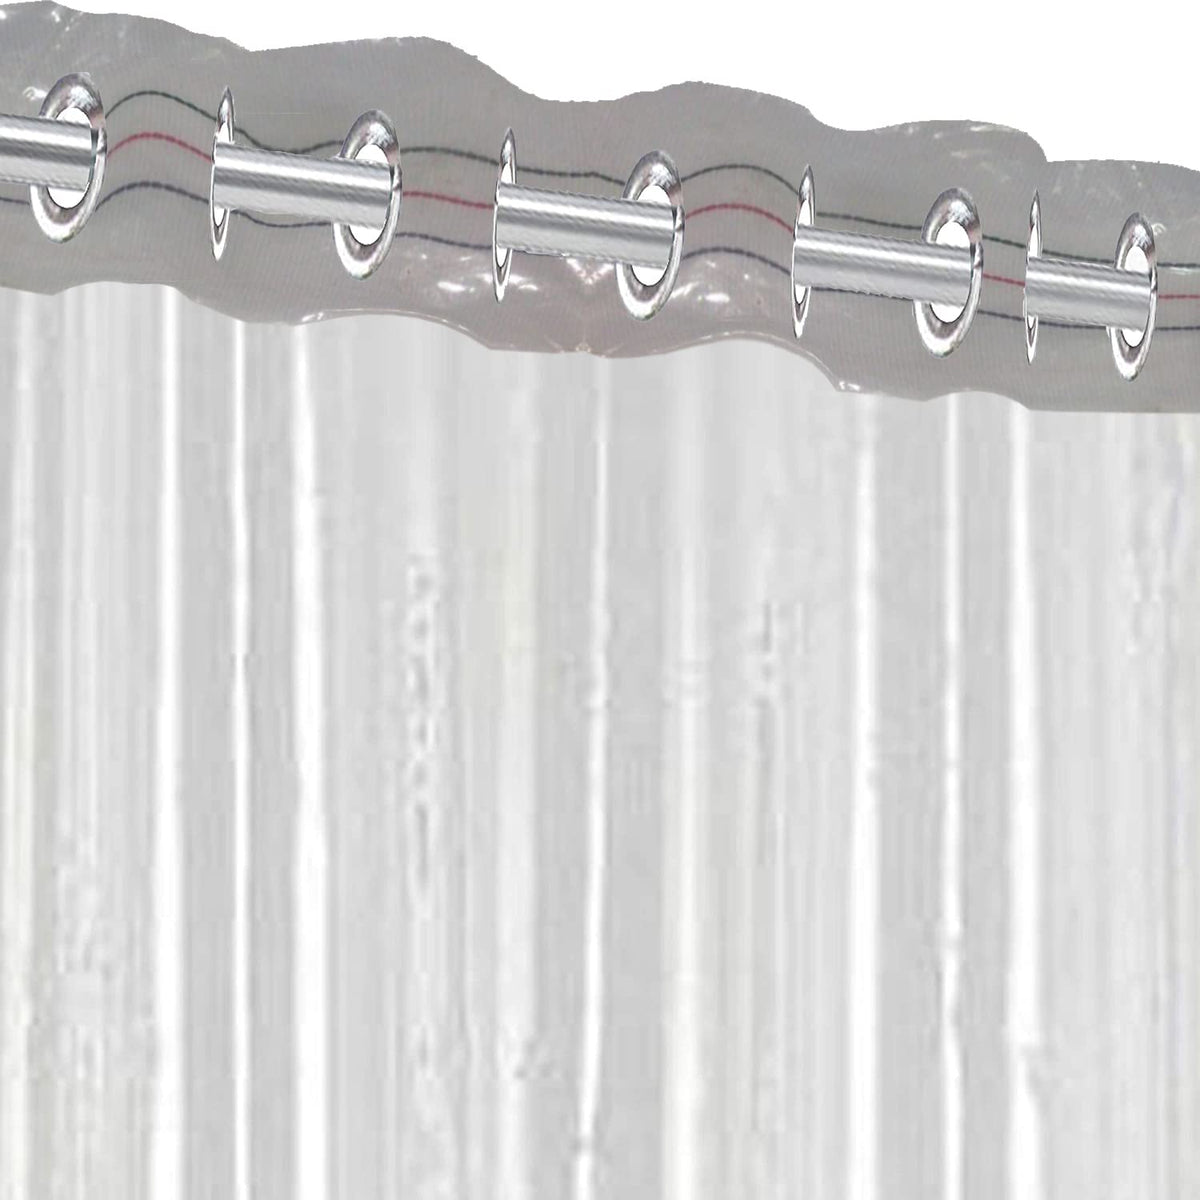 Kuber Industries 30 MM PVC Transparent Curtain|Water Proof AC Curtain|Eyelet Rings & Quick Water Release|Curtain 7 Feet|